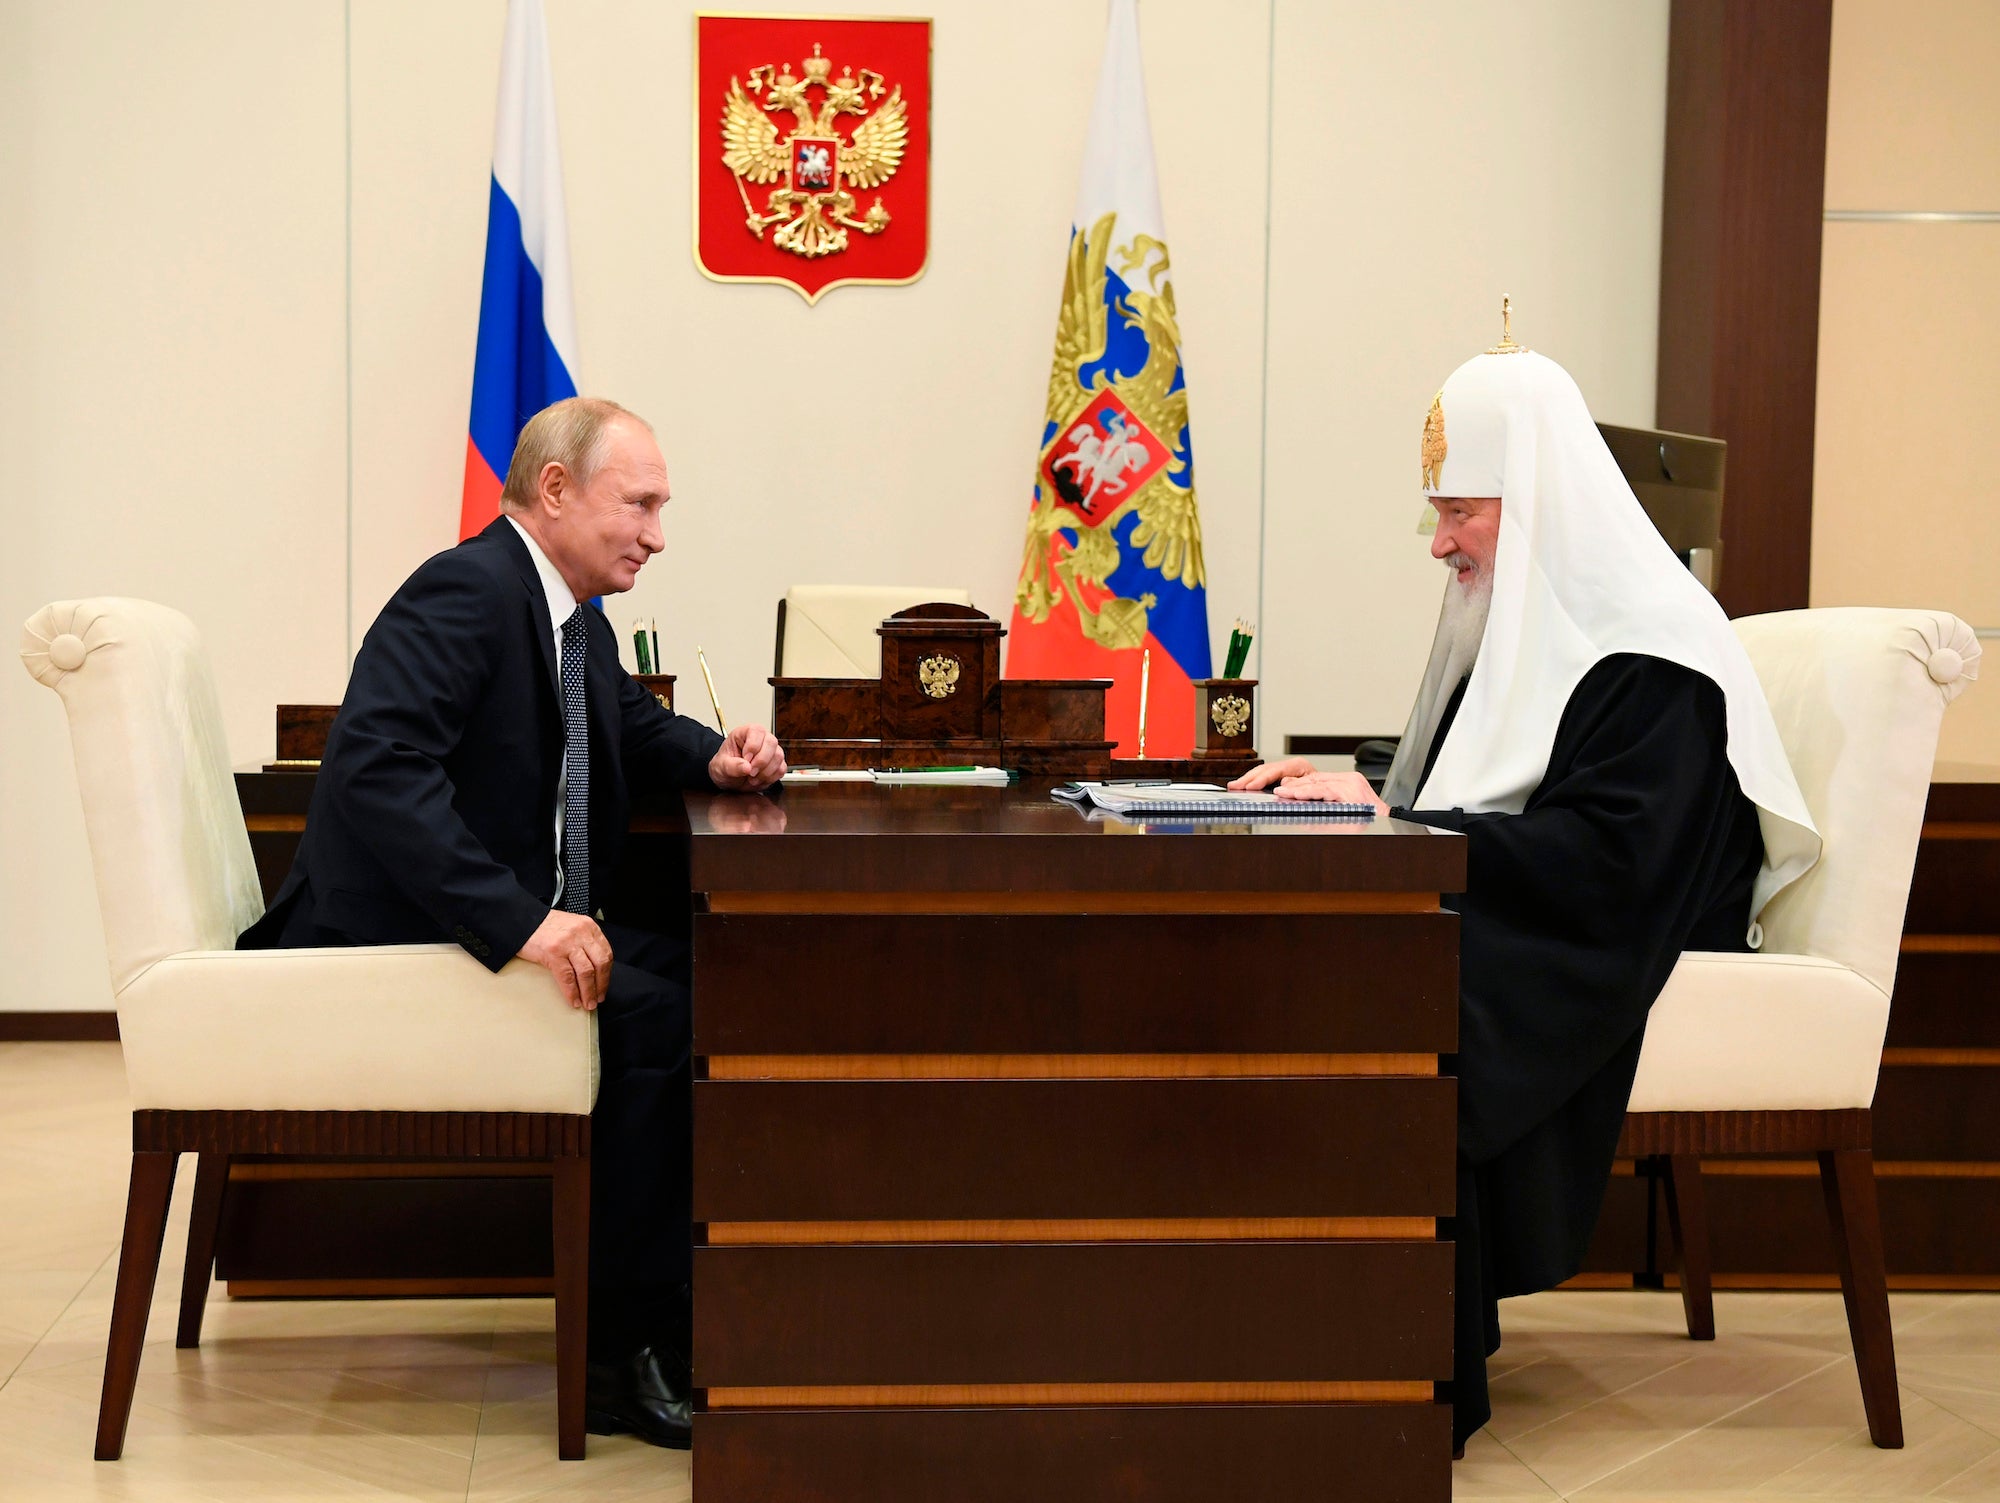 Russian President Vladimir Putin meets with Patriarch Kirill of Moscow and All Russia at the Novo-Ogaryovo state residence, outside Moscow, Russia.